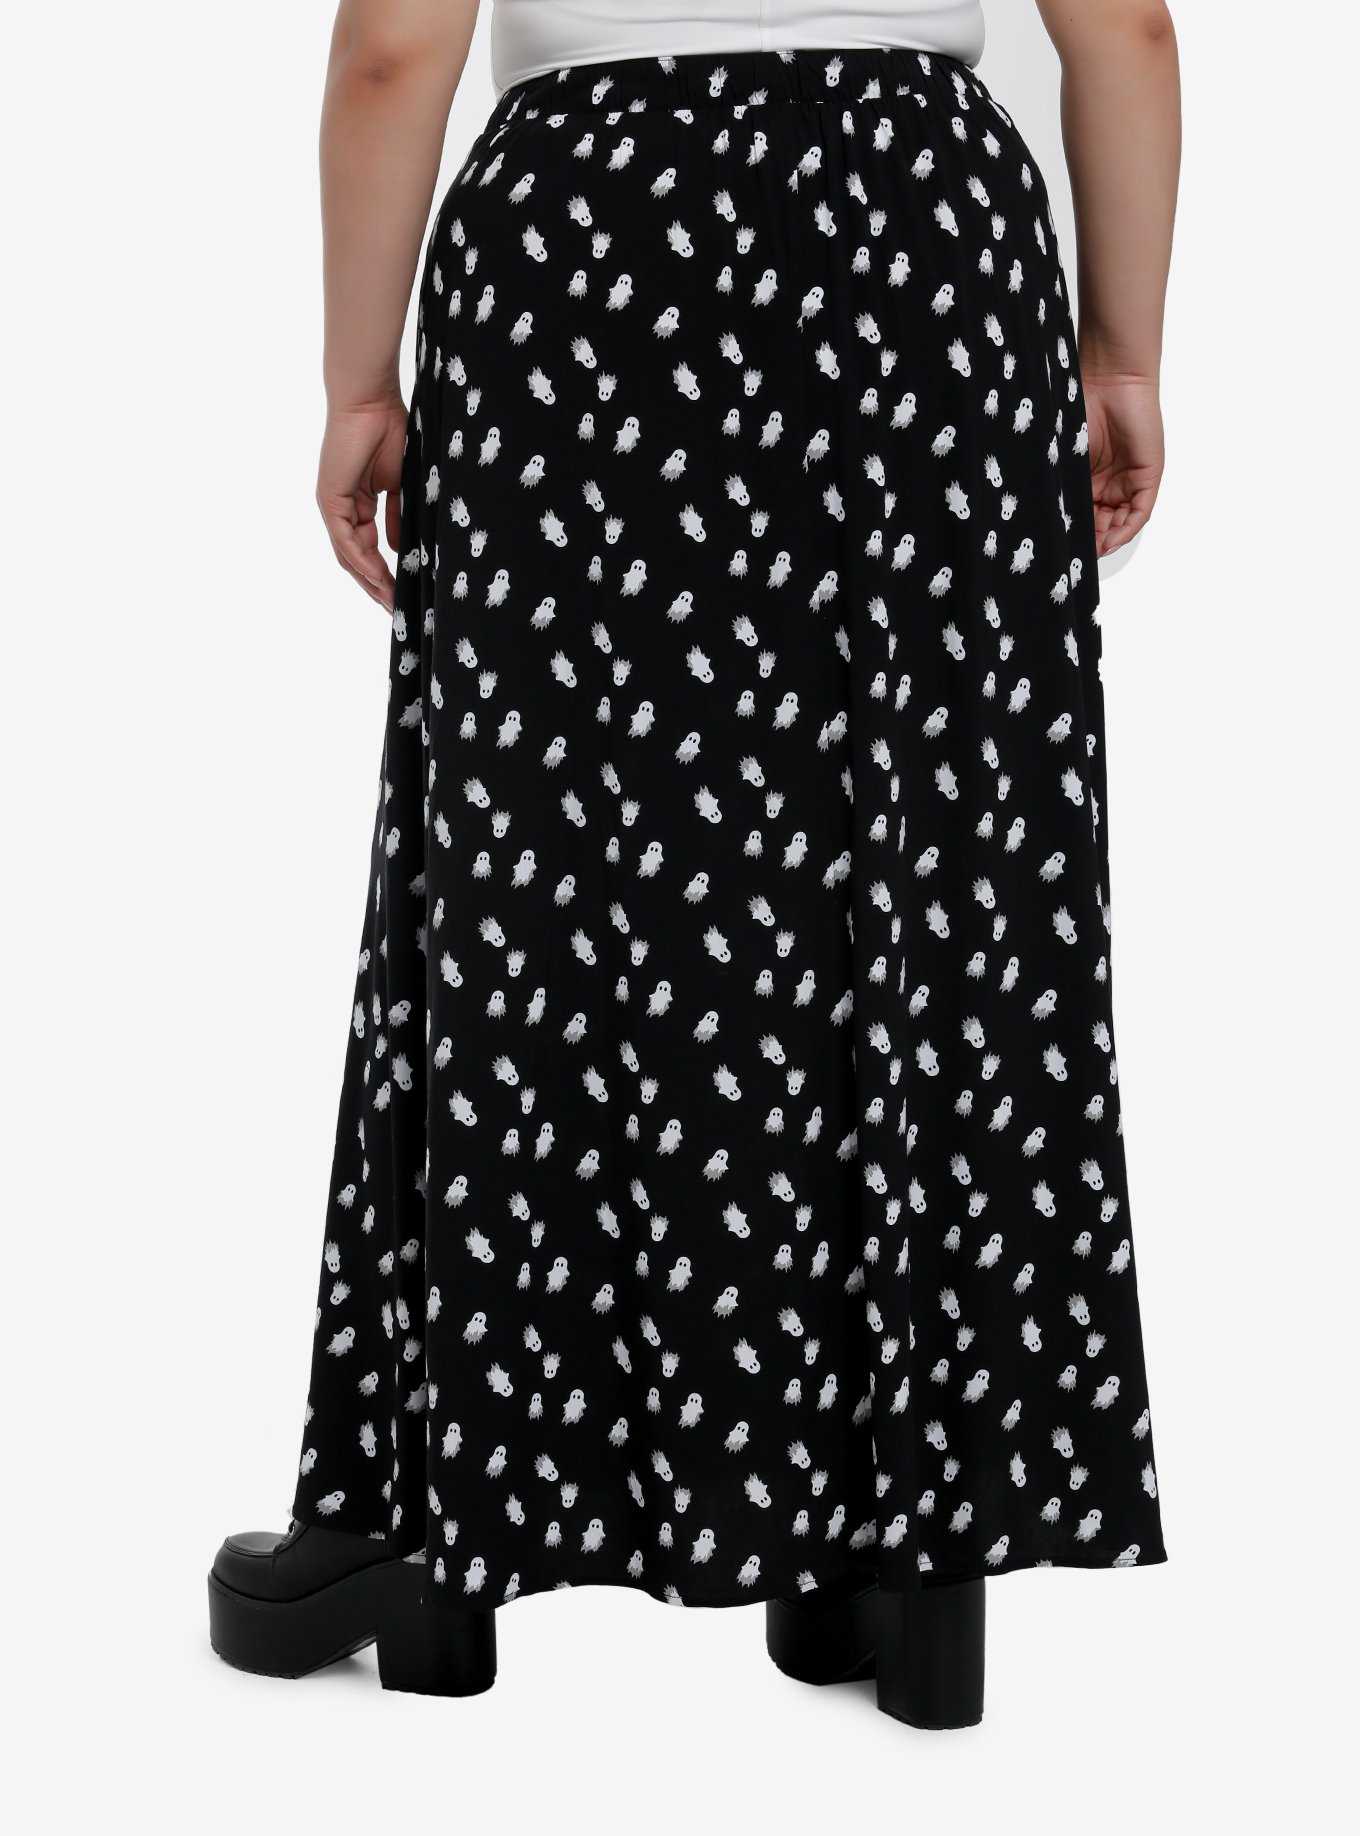 Thorn & Fable Black & White Ghost Maxi Skirt Plus Size, , hi-res